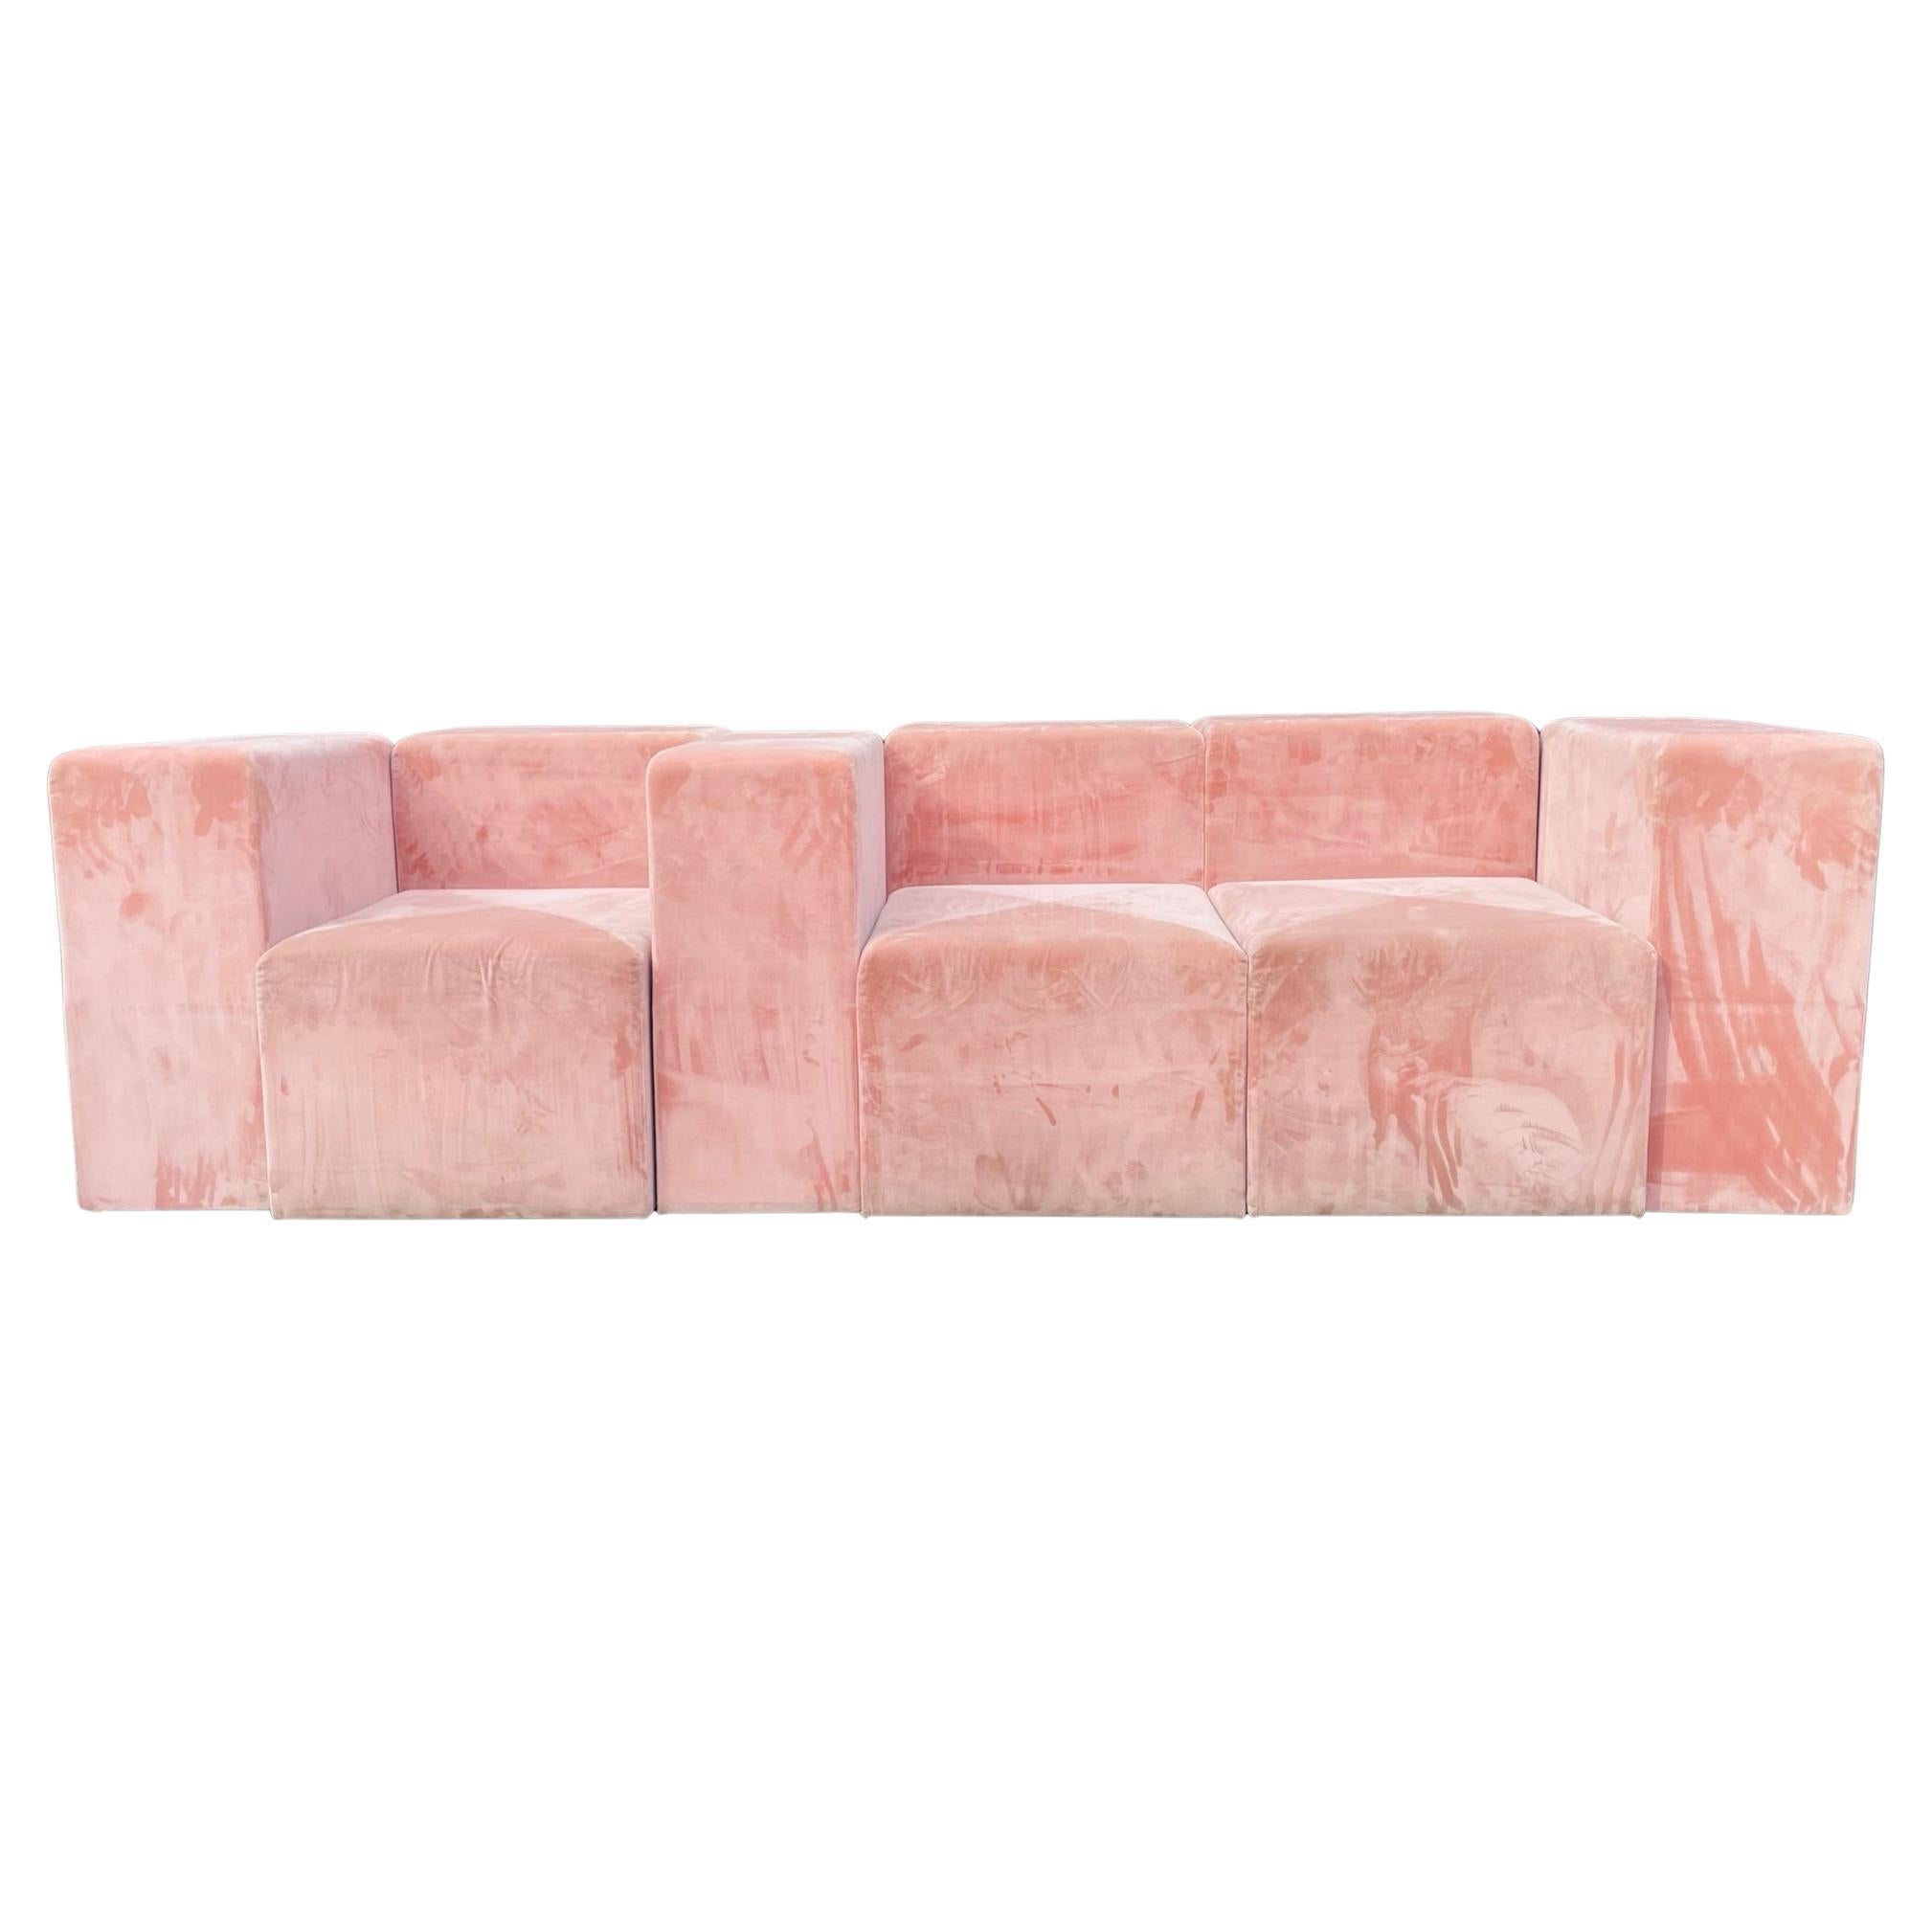 Three Piece Modular Sofa by Mille For Sale